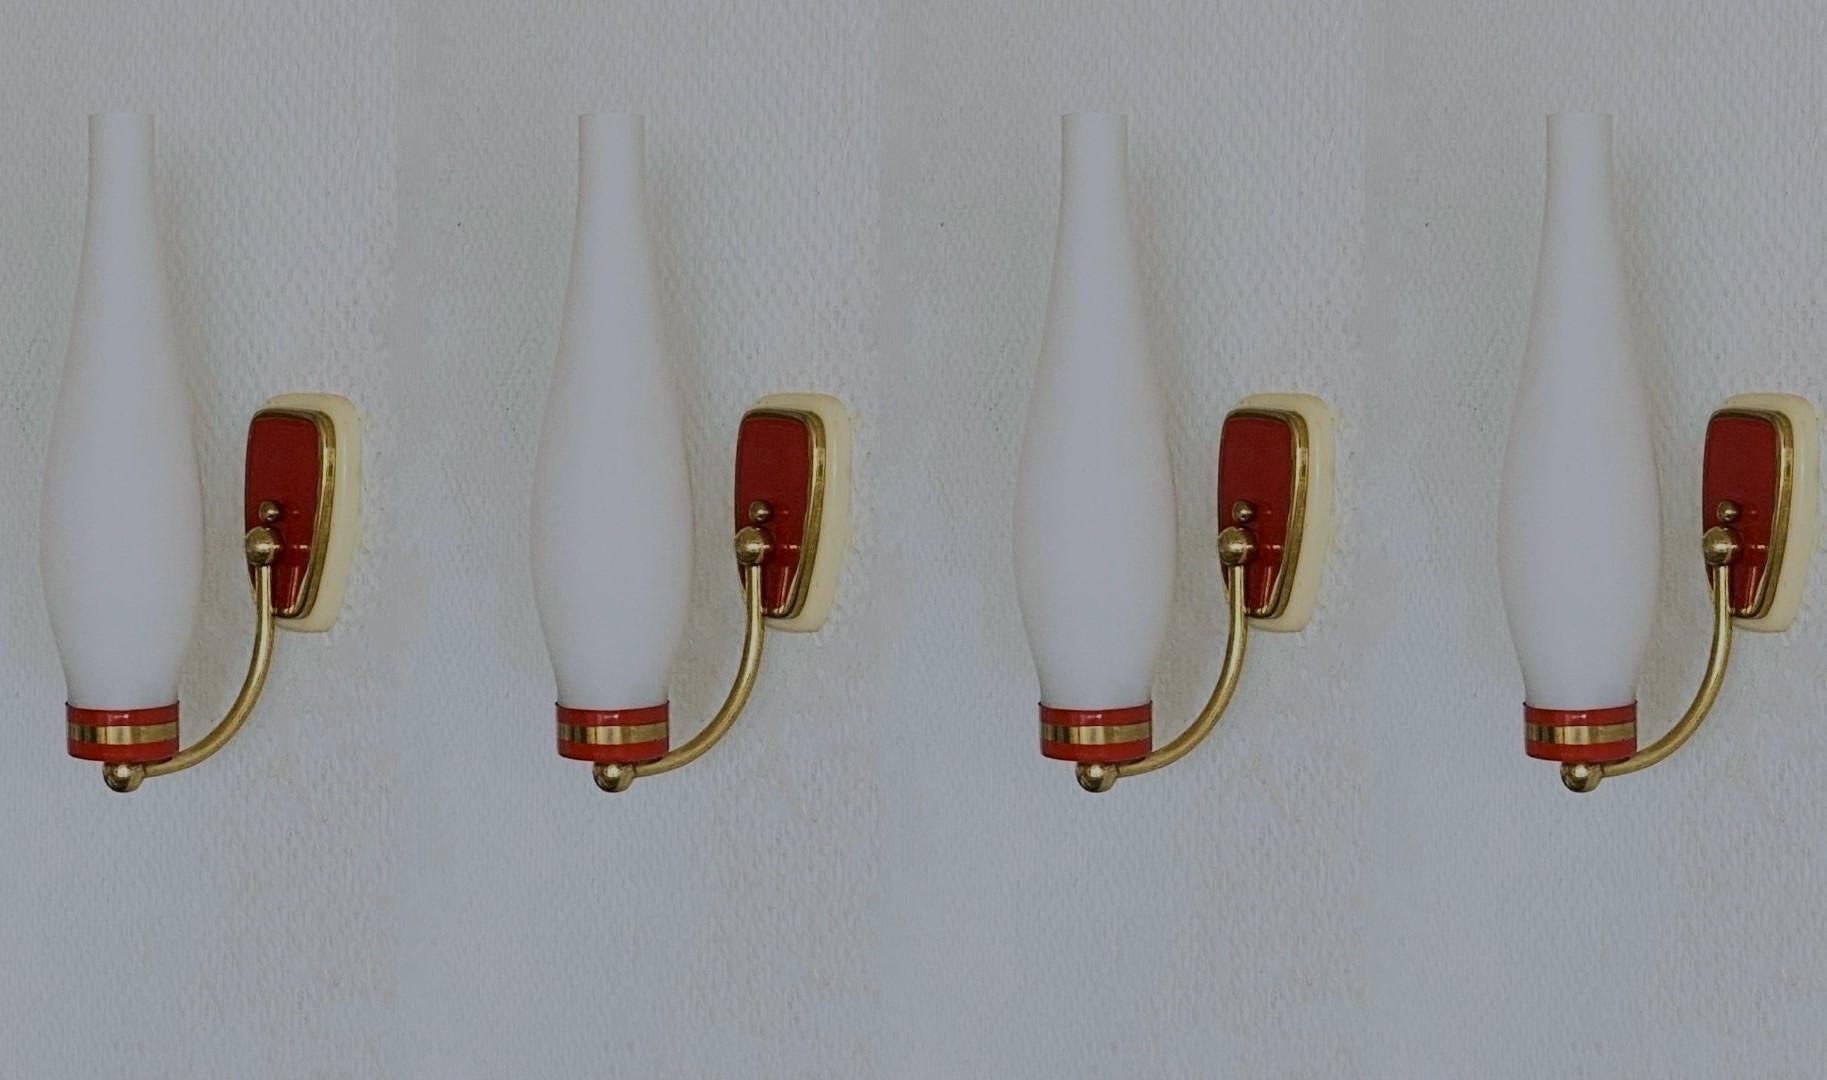 Set of four lovely wall sconces in Stilnovo style, Italy, 1960, modernist and clear lines design, brass galery with opal glass shades - the brass mounts are parcel red enameled. All four sconces in fine vintage condition, no damages, fully